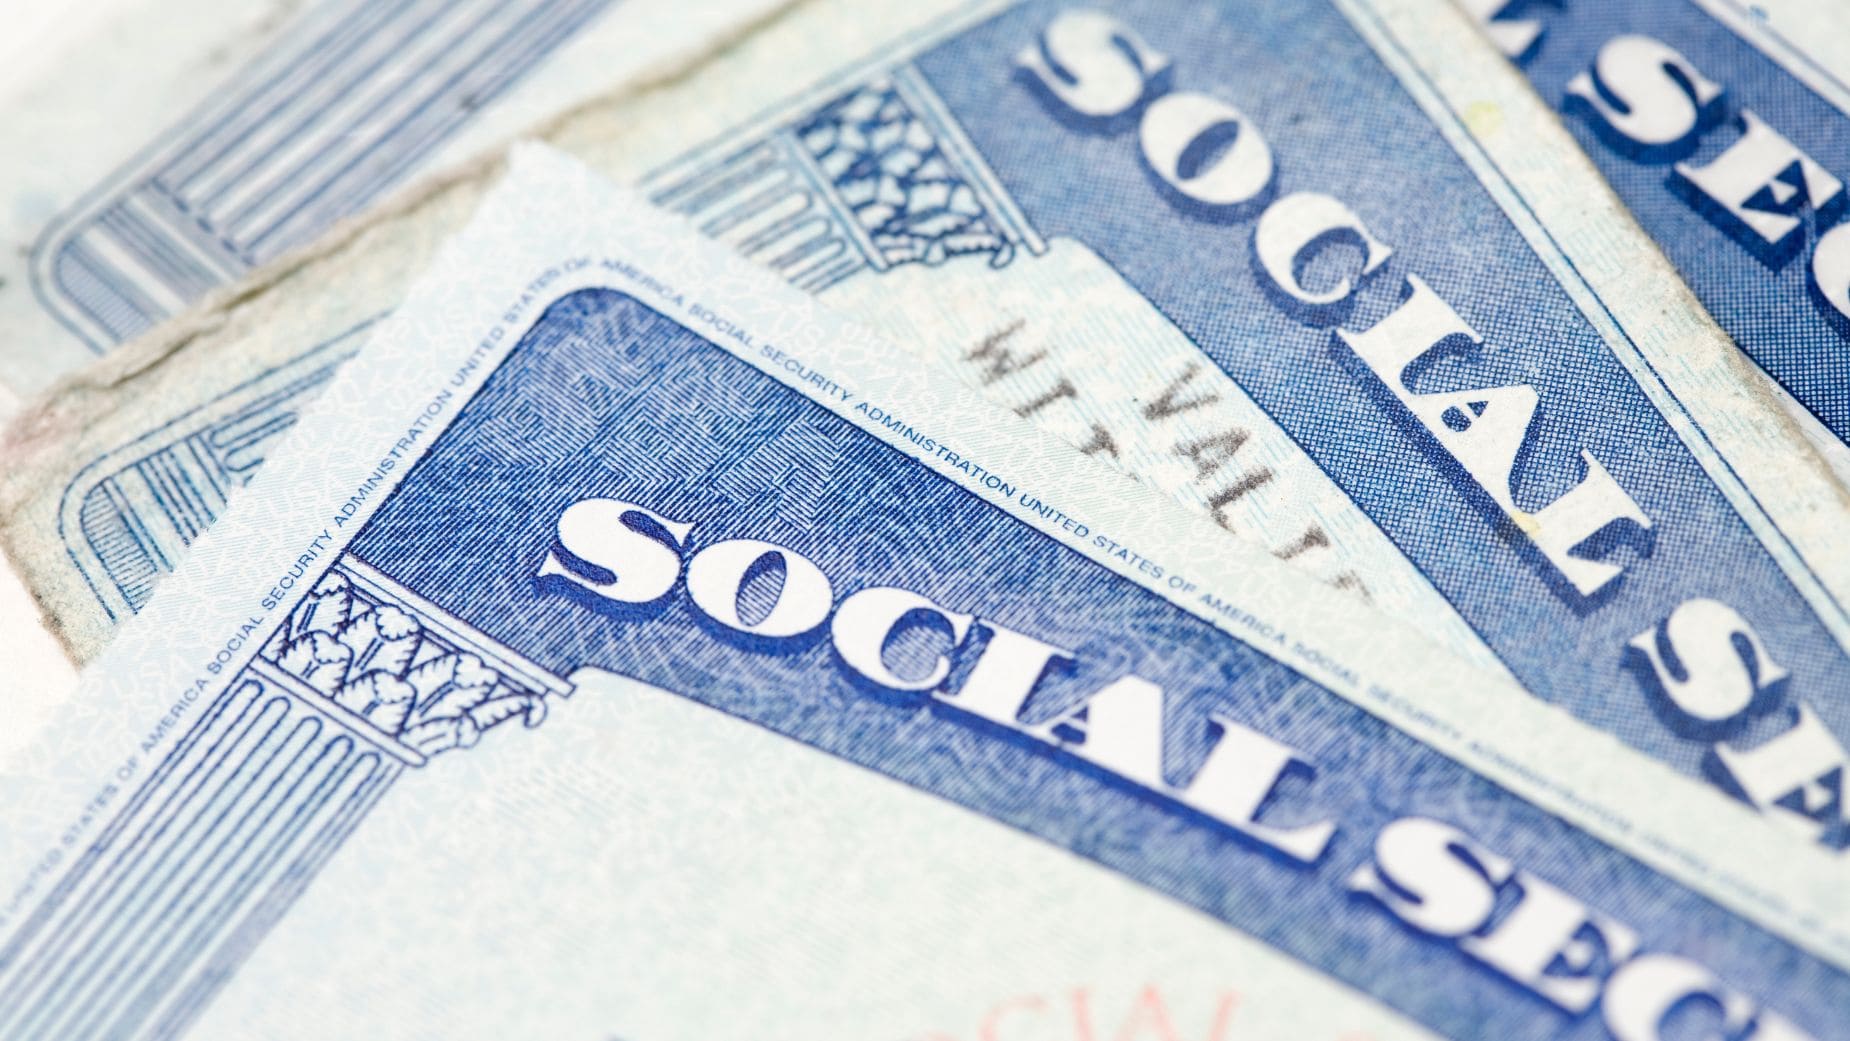 Social Security is sending the new paycheck to Disability Beneficiaries in days